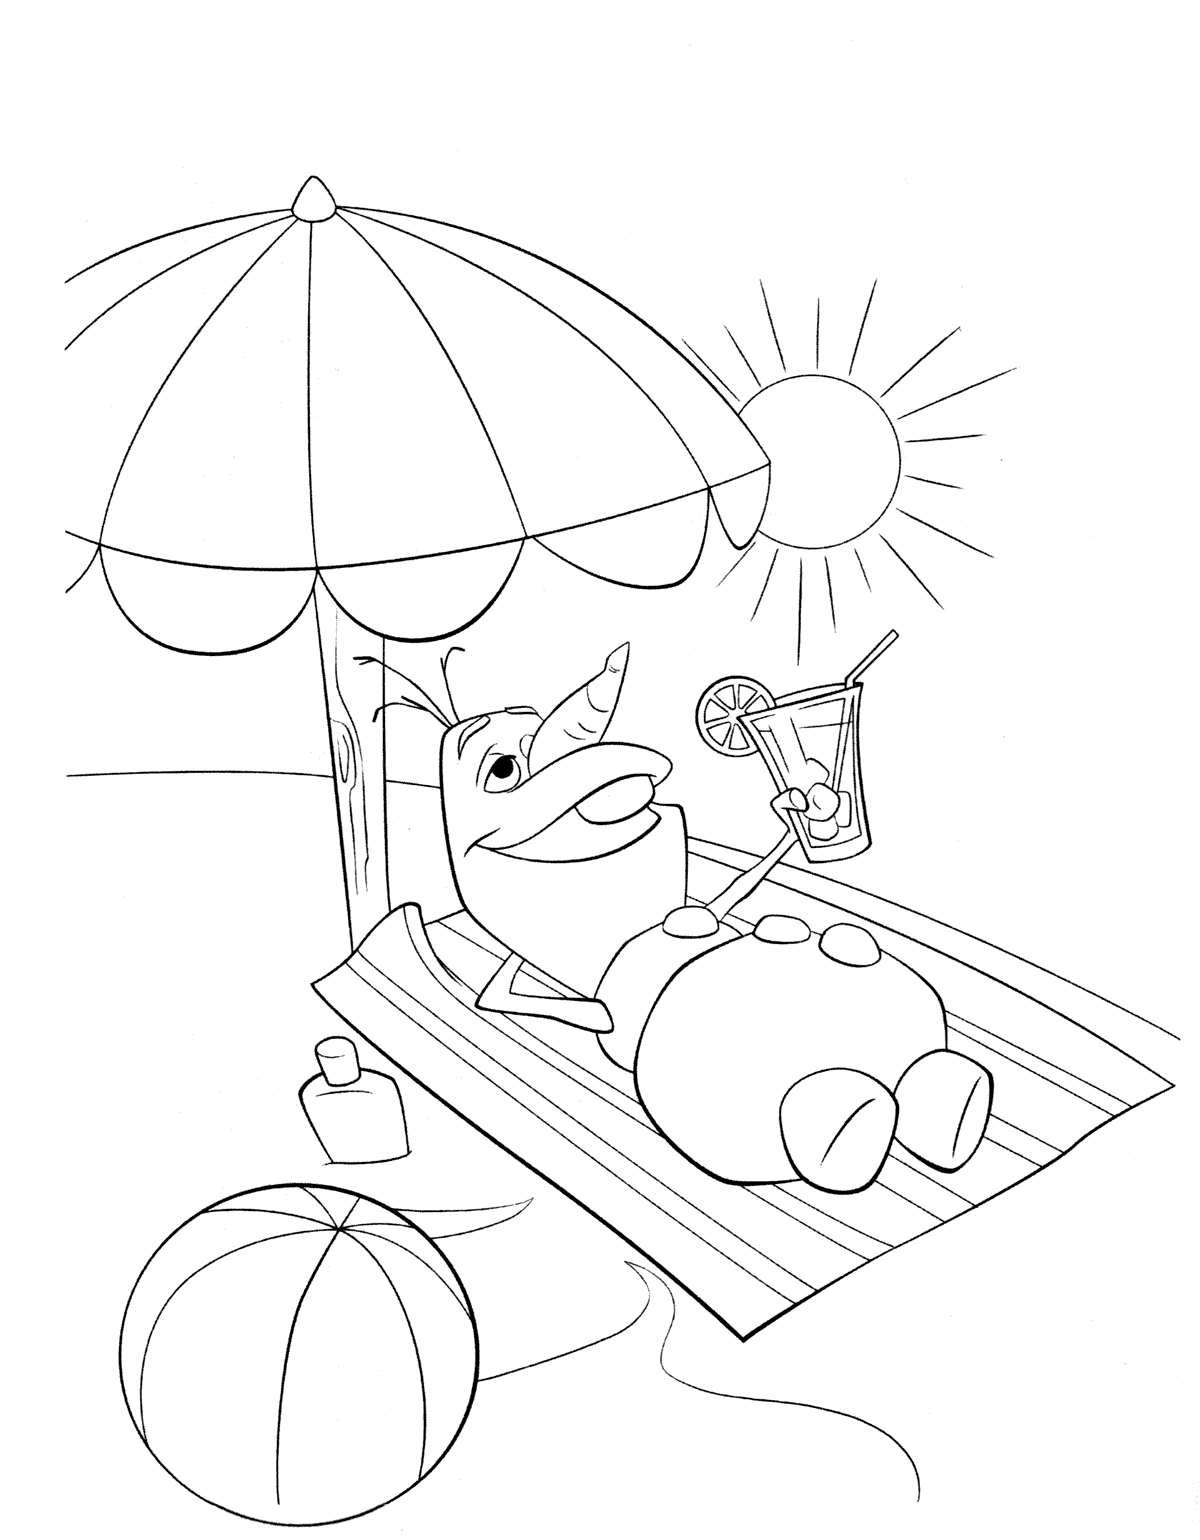 Coloring page - Olaf and summer